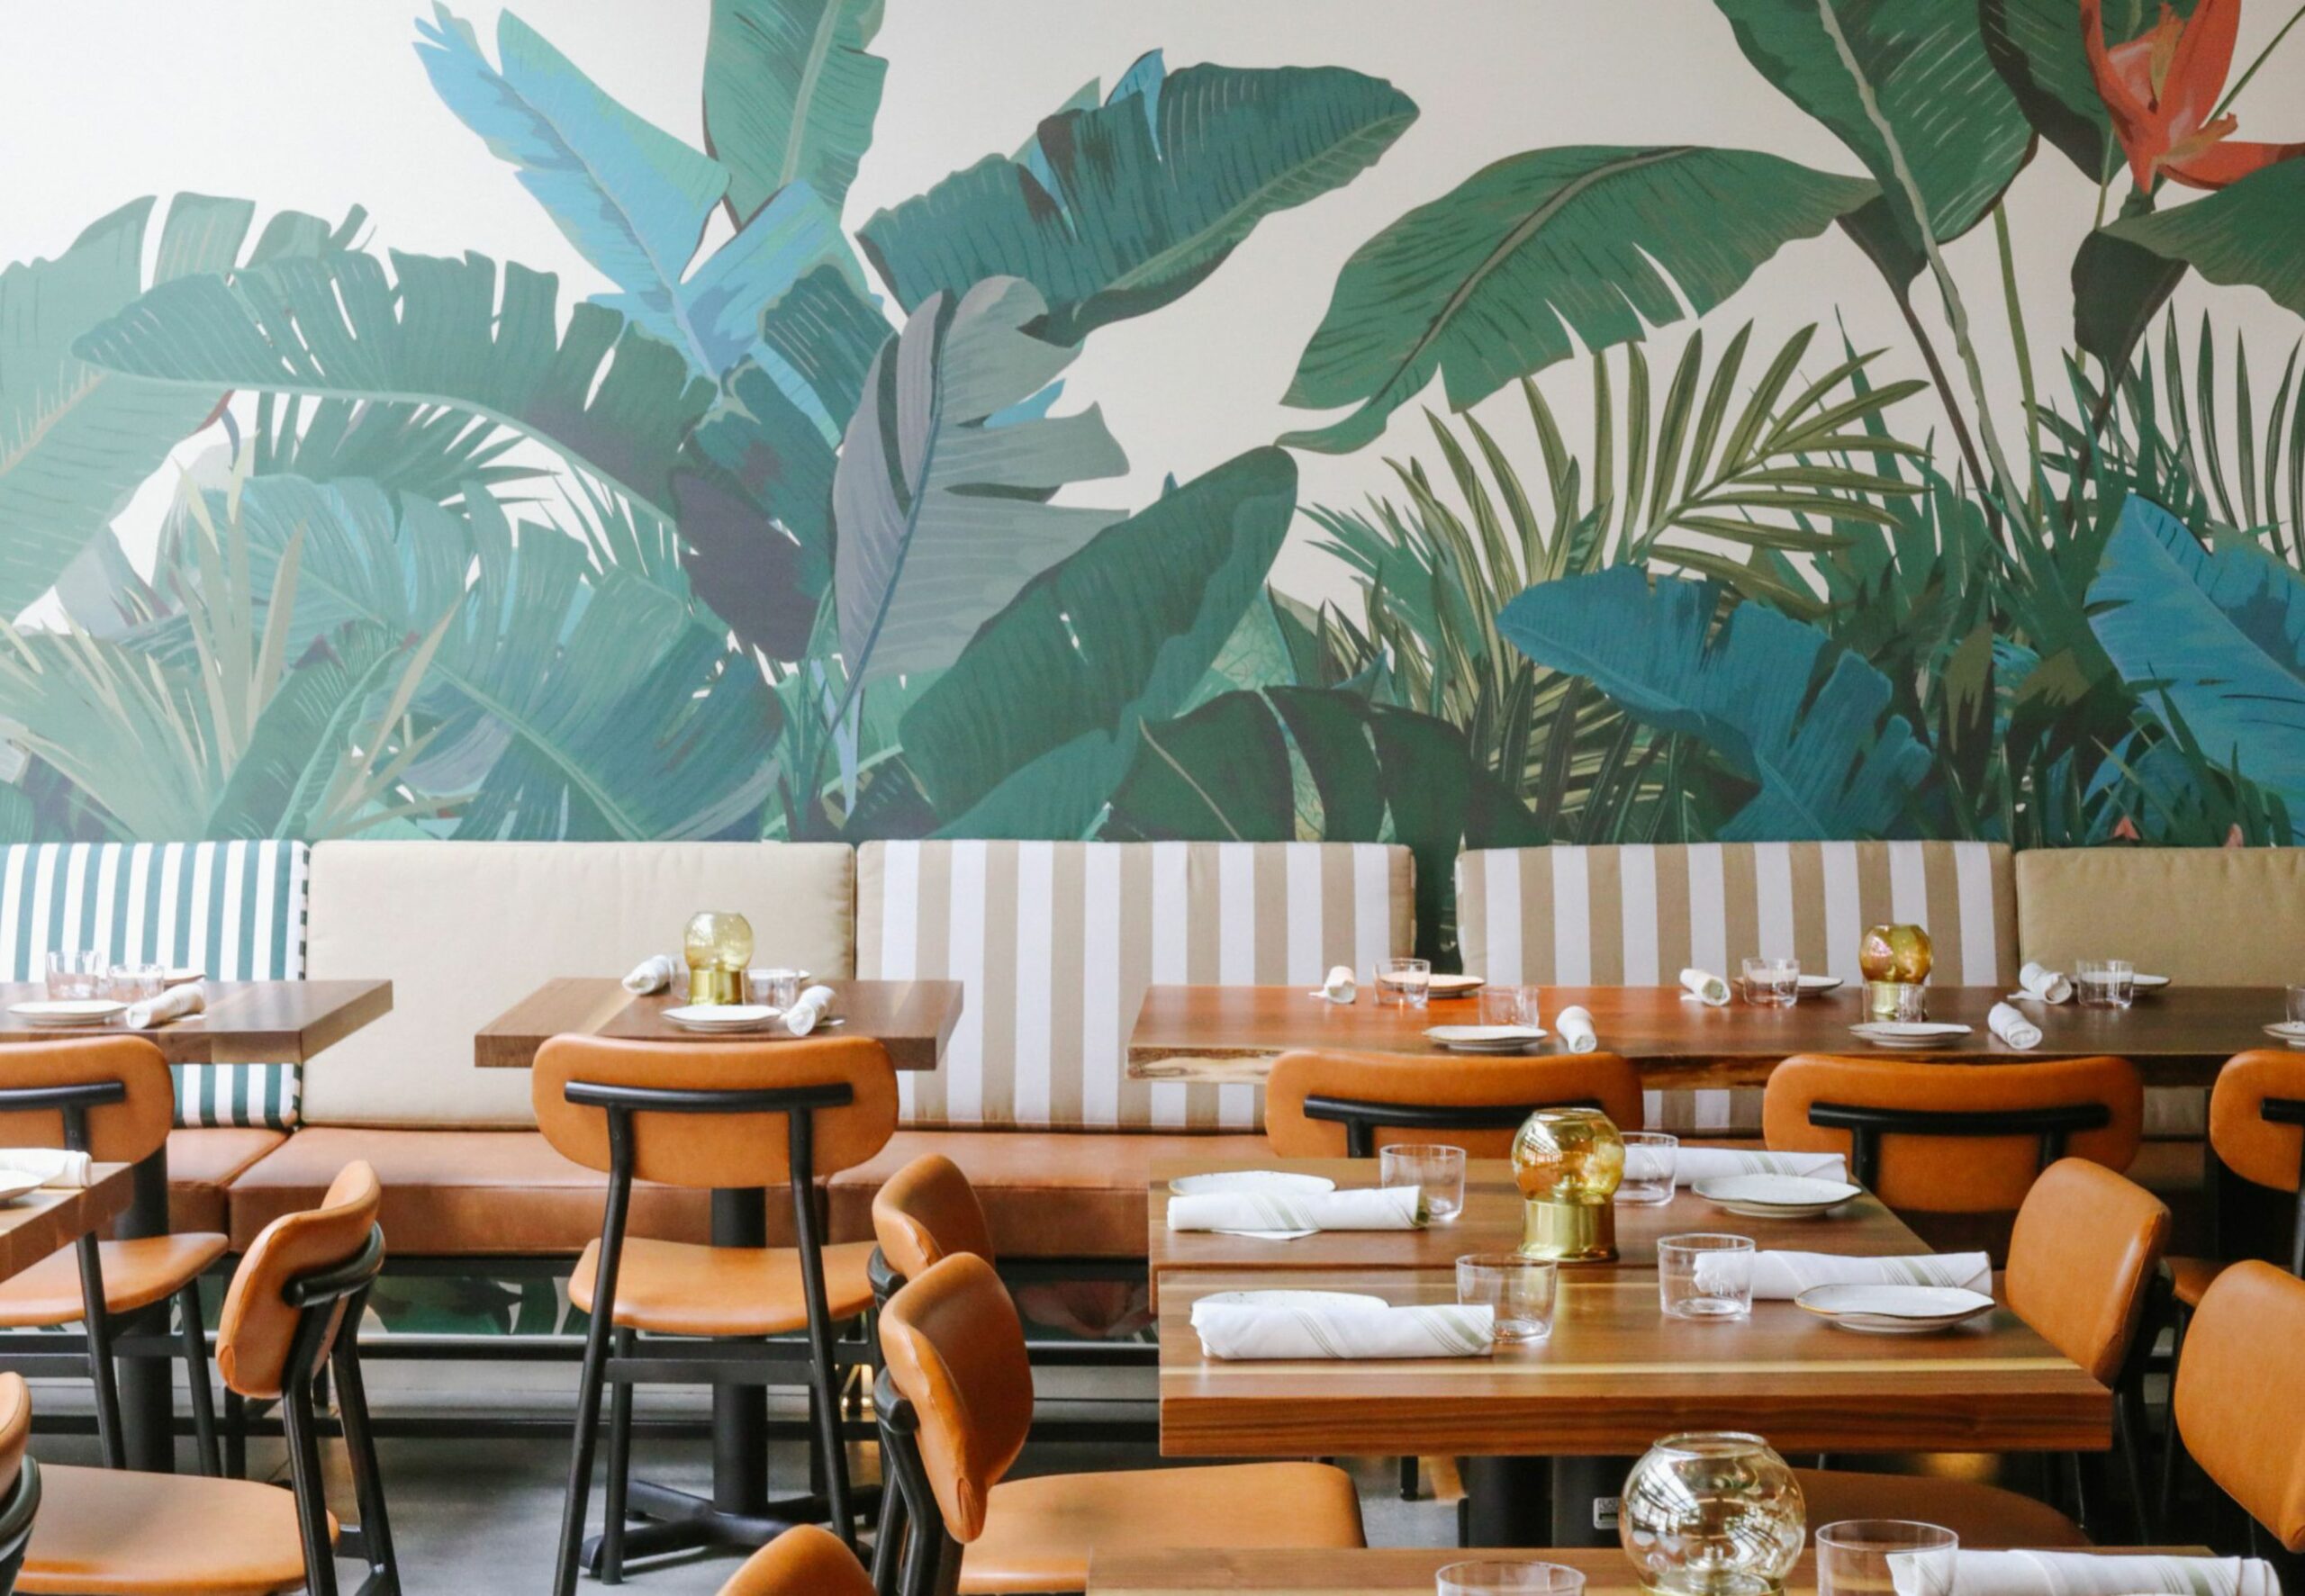 Restaurant with wooden chairs and palm leave print wallpaper